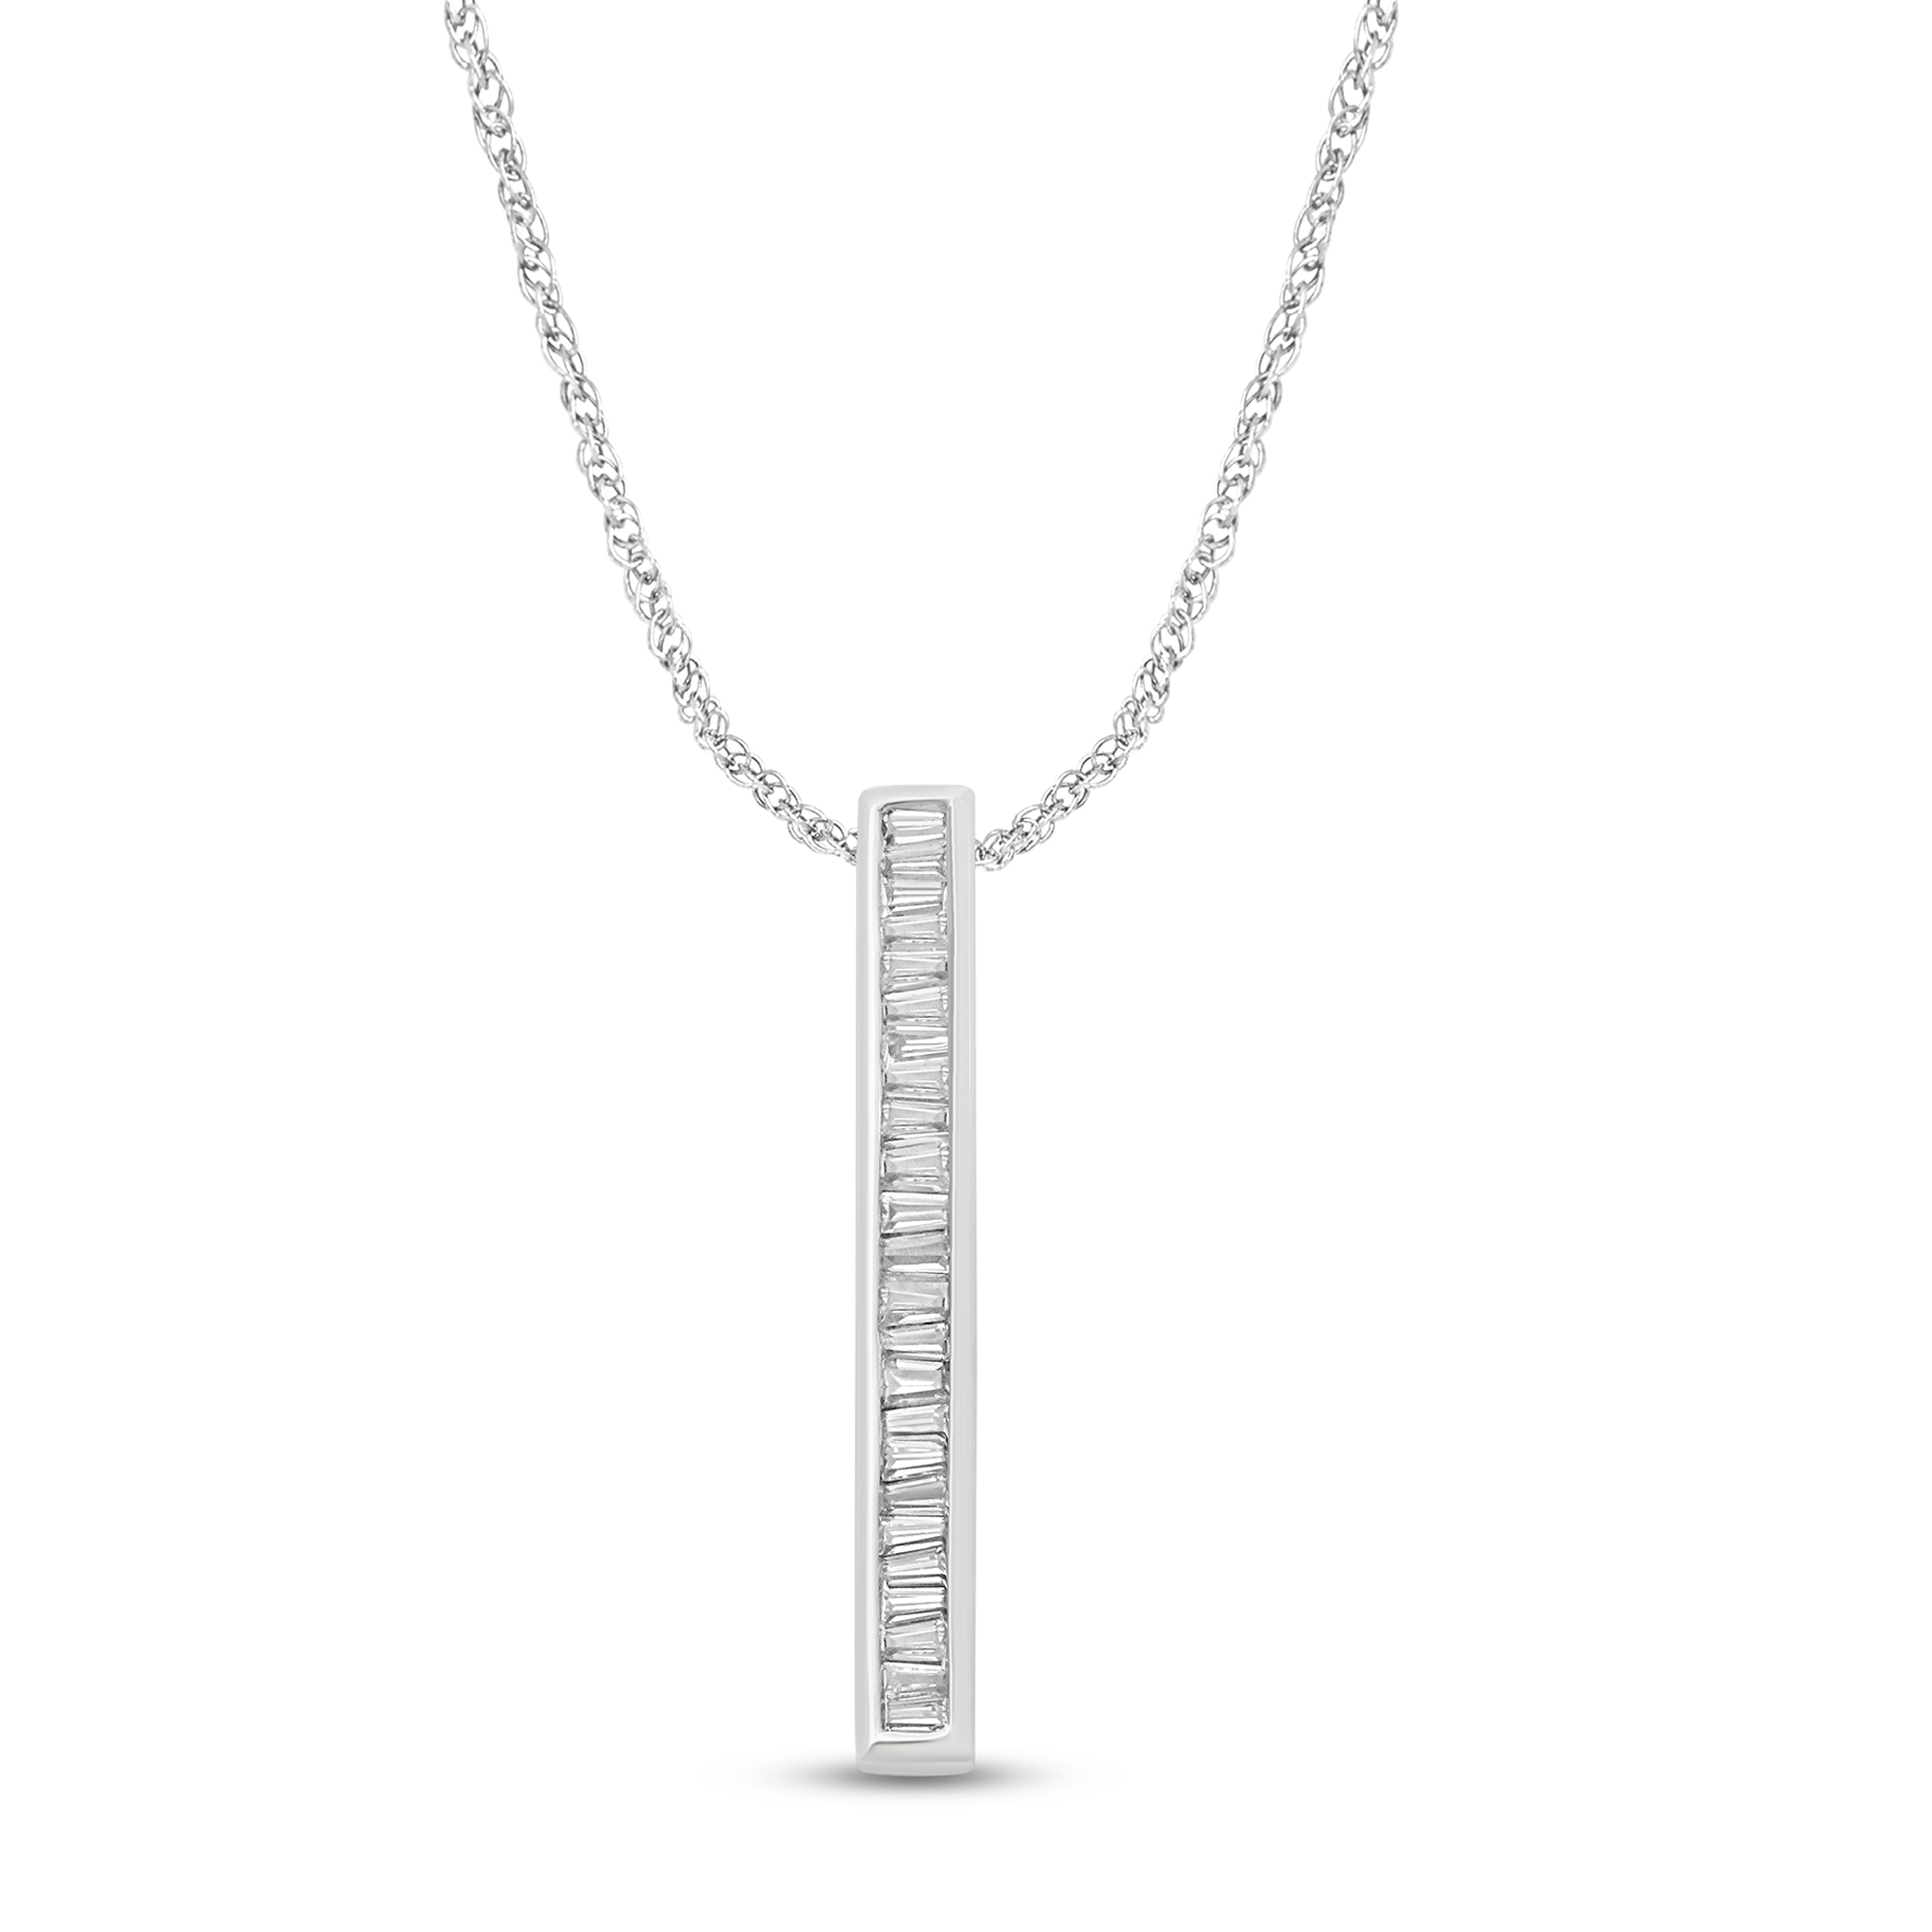 New Death Star necklace from Kay Jewelers - The Kessel Runway